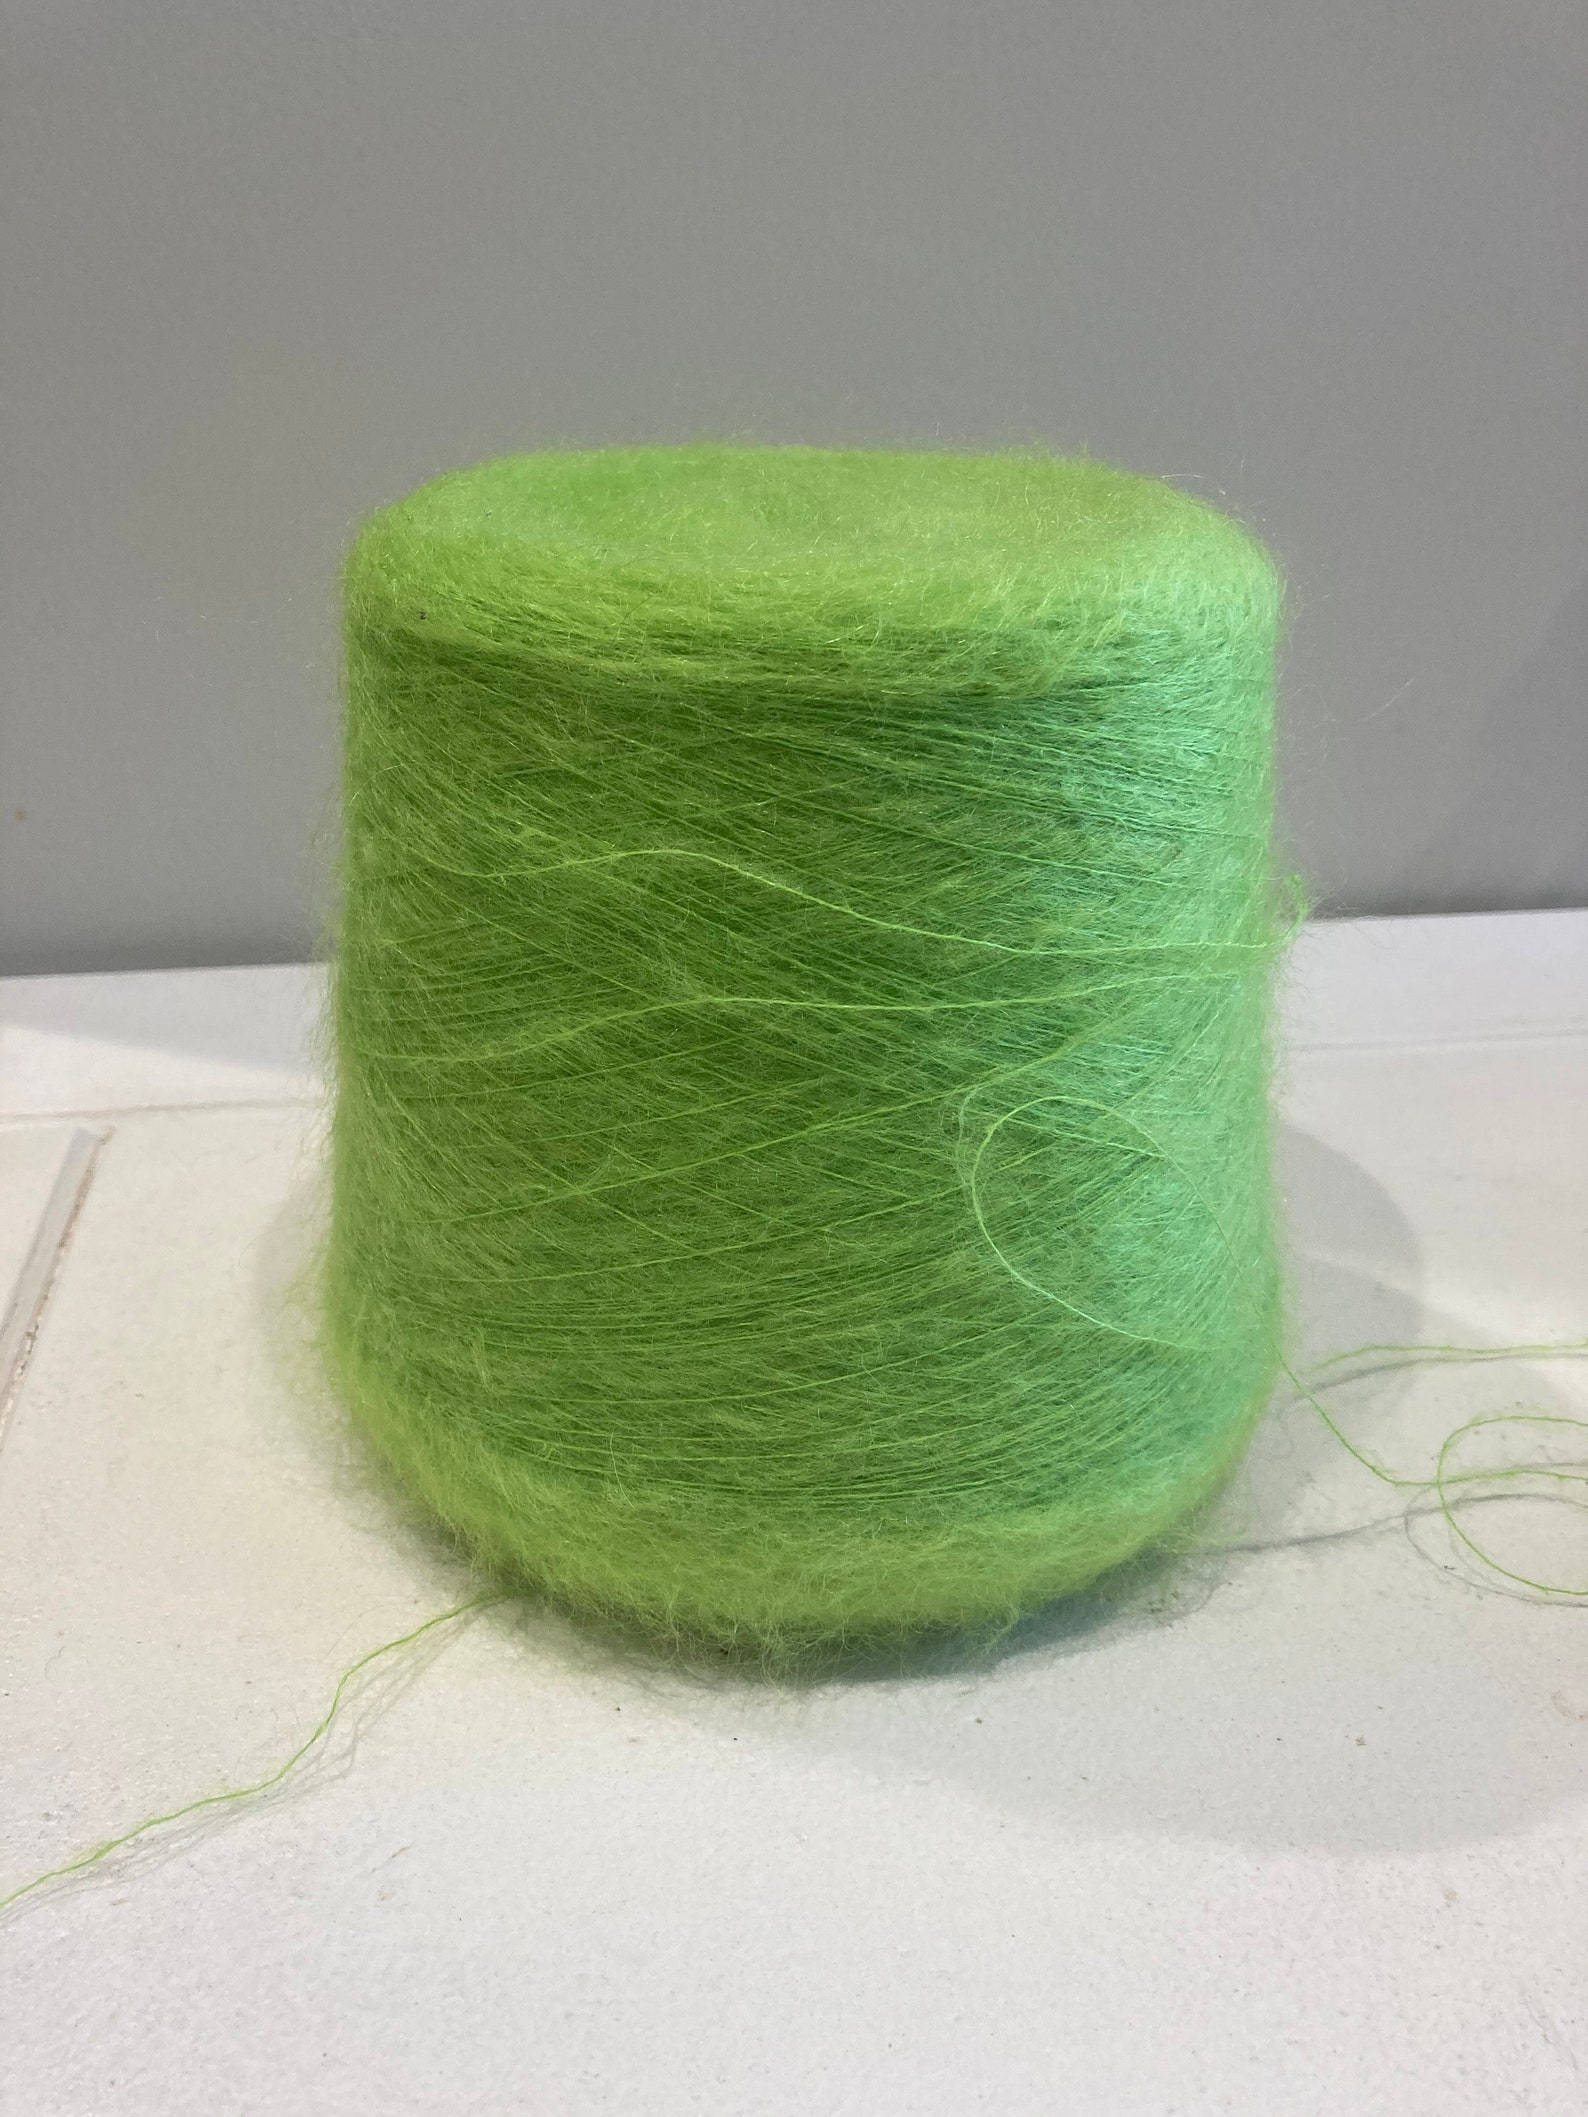 Acid green kid Mohair yarn cone made in italy approx 650g | Etsy